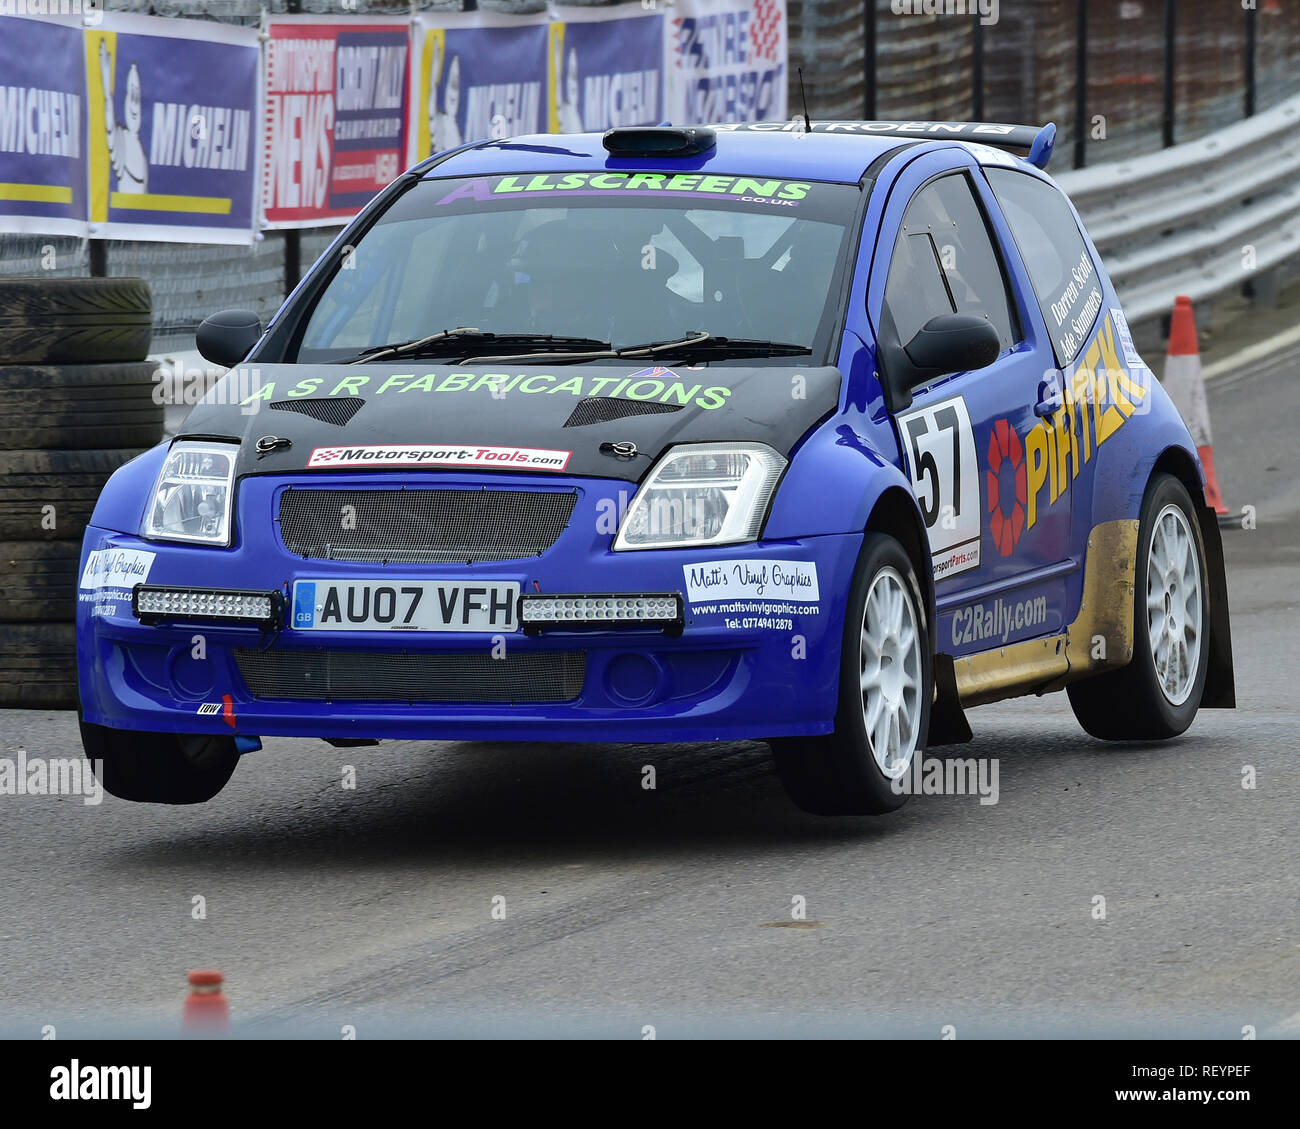 Darren Scott, Ade Summers, Citroen C2 S1600, MGJ Rally Stages, Chelmsford Motor Club, Brands Hatch,  Saturday, 19th January 2019, MSV, Circuit Rally C Stock Photo